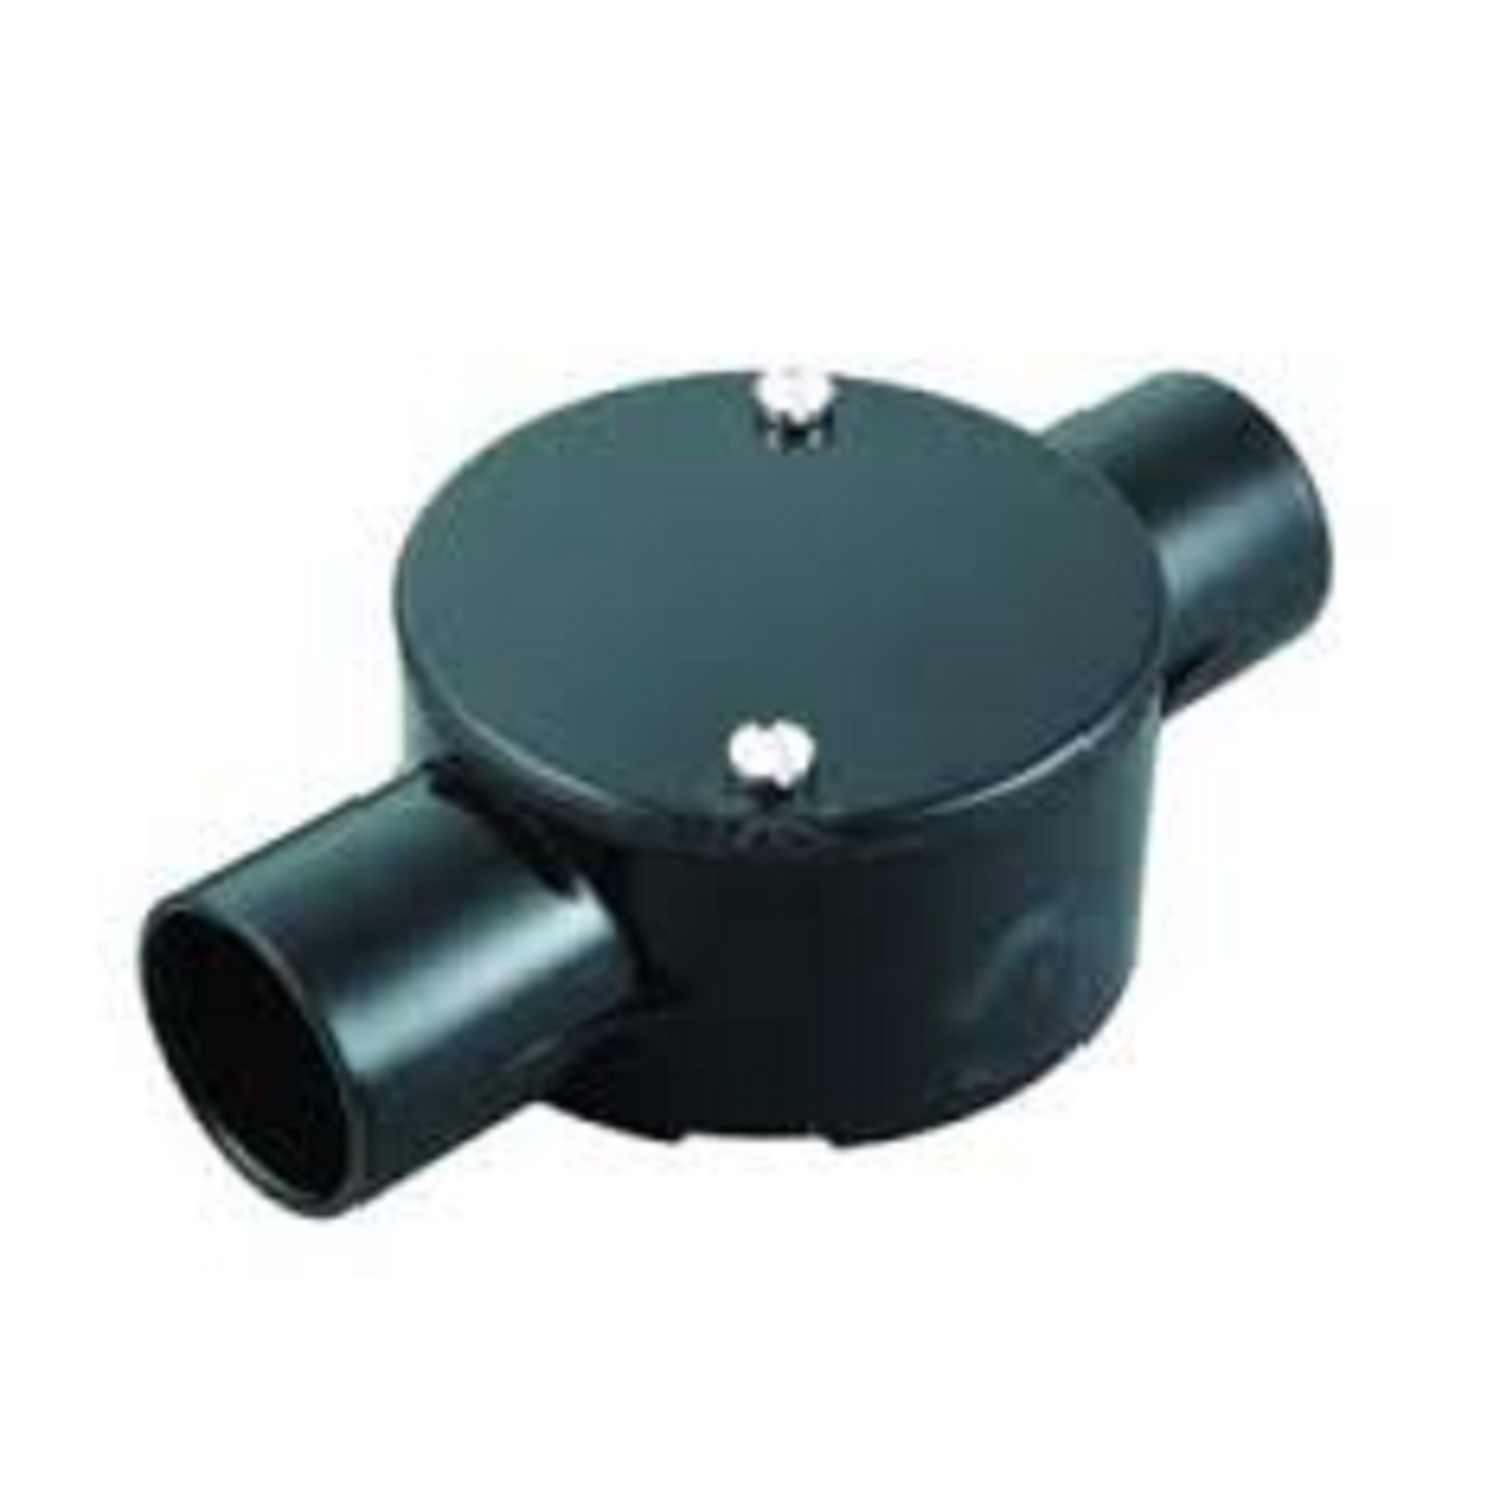 25 MM Precision Two-Way Flate Junction Box Black And Heavy Duty